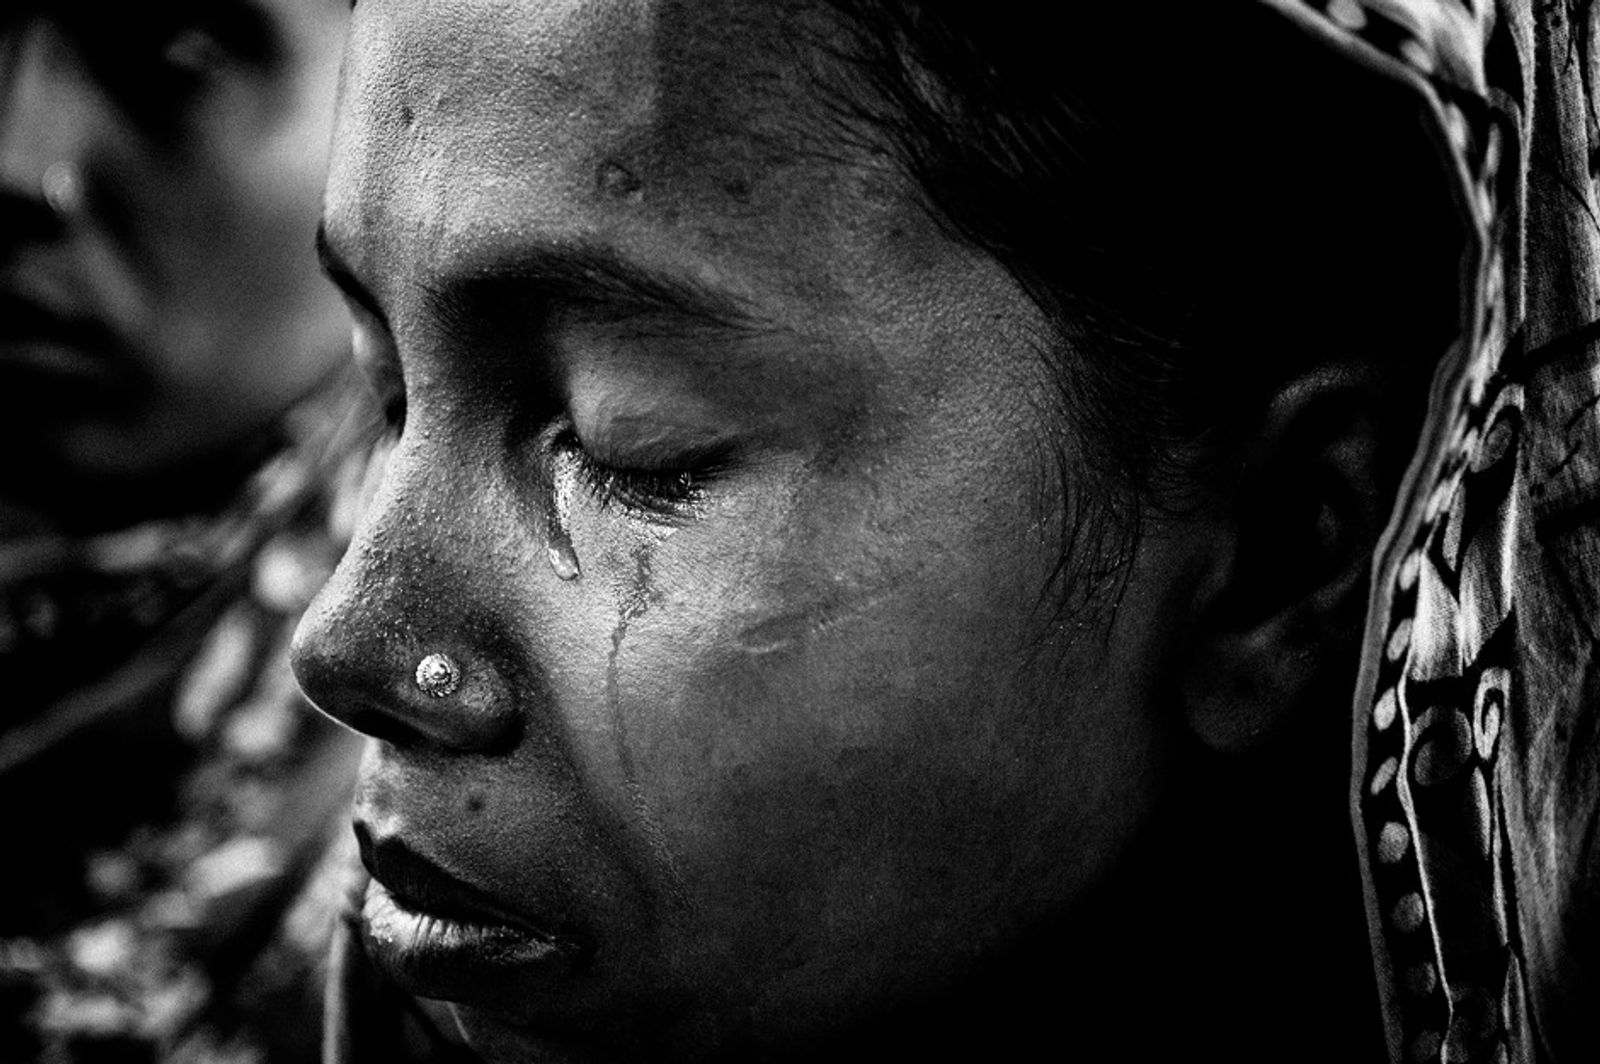 © Rahul Talukder - A woman grieves for a missing family member who used to work in one of the garment factories of Rana Plaza.